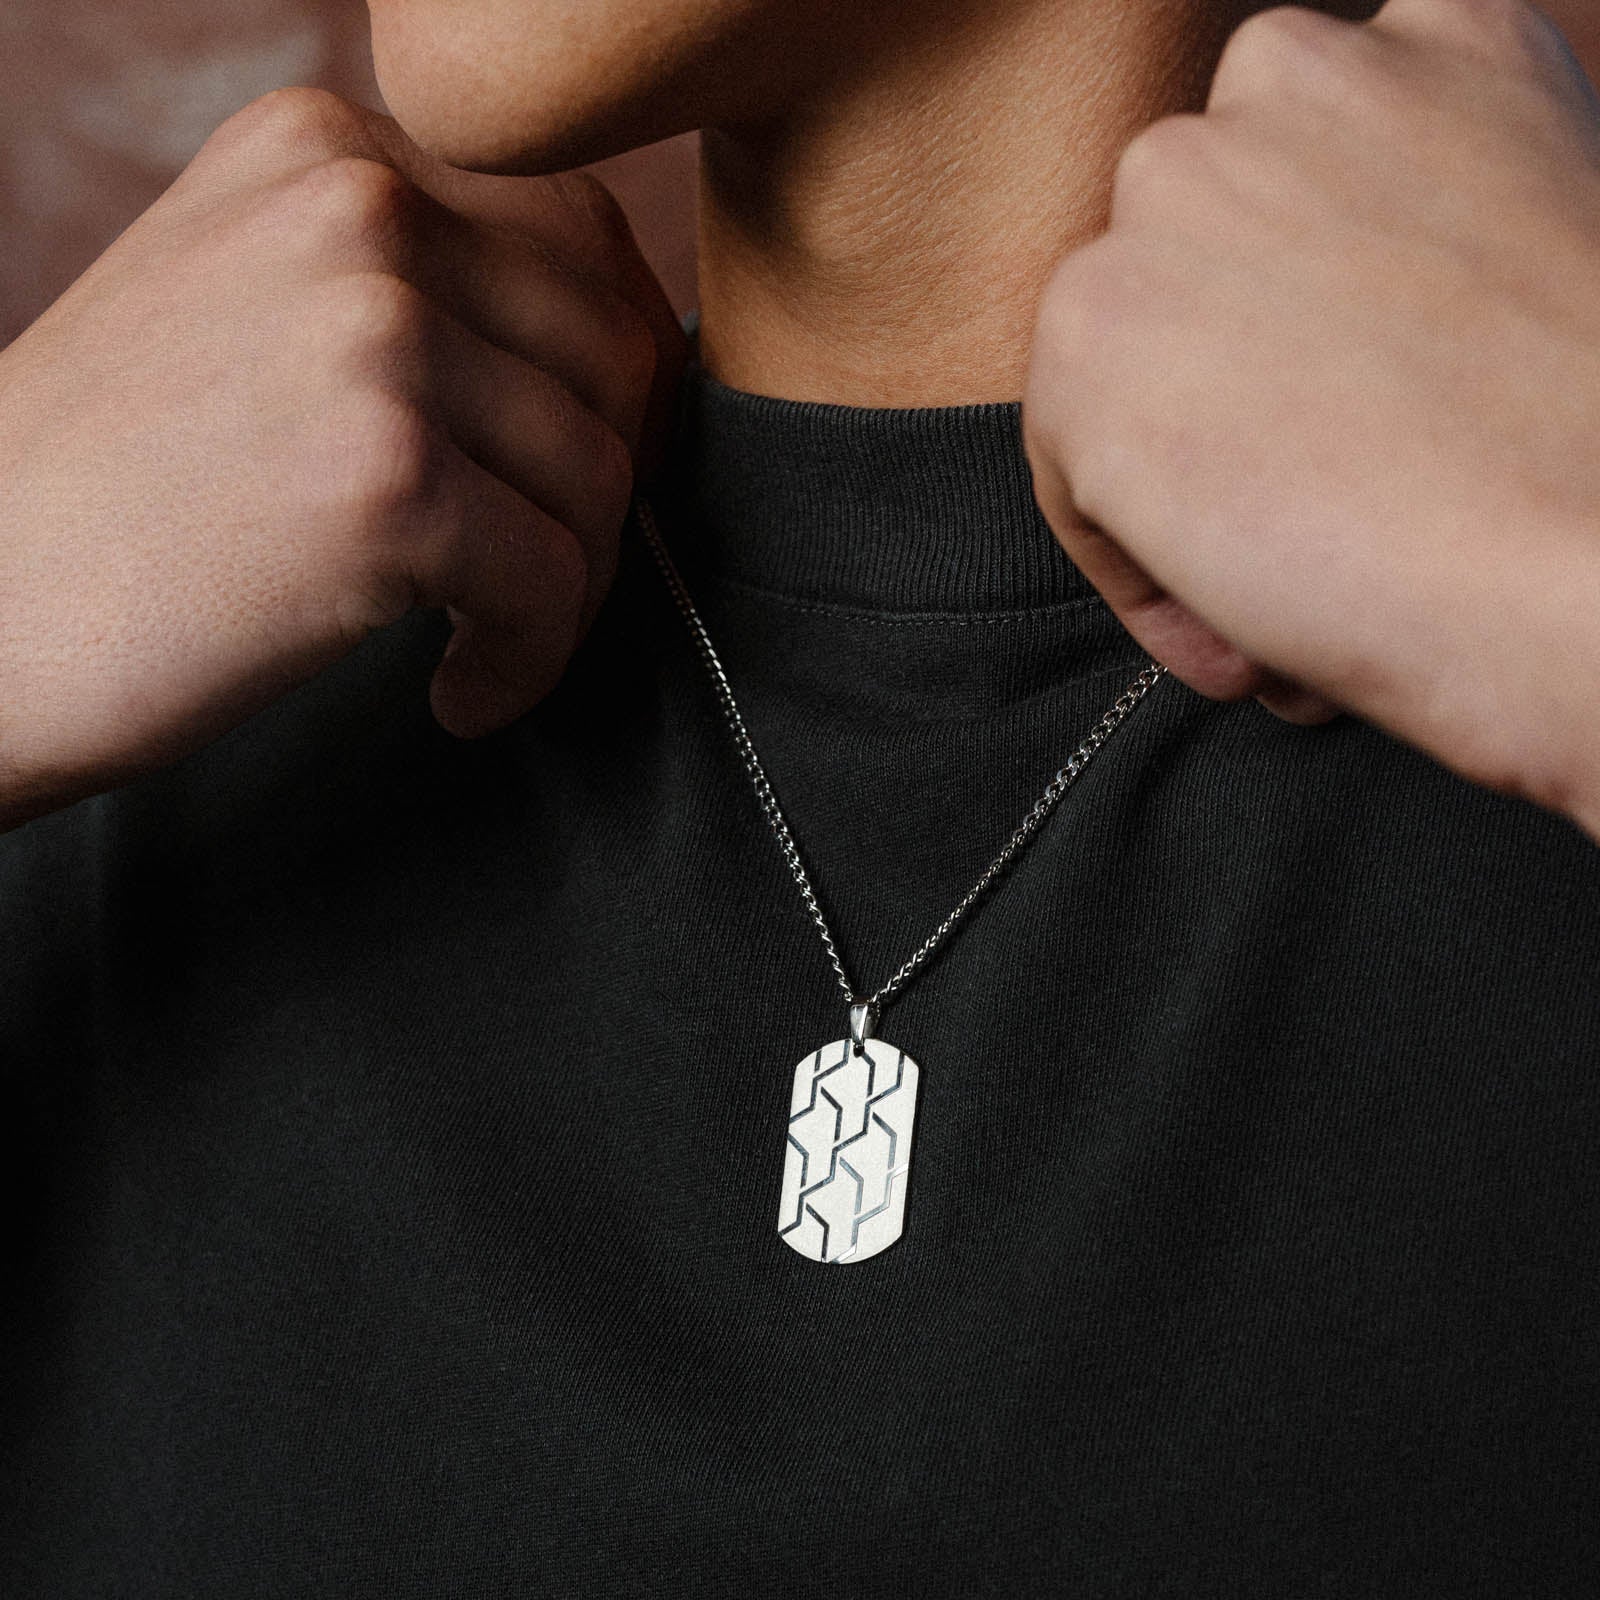 K12 - SILVER STEEL DOGTAG CHAIN